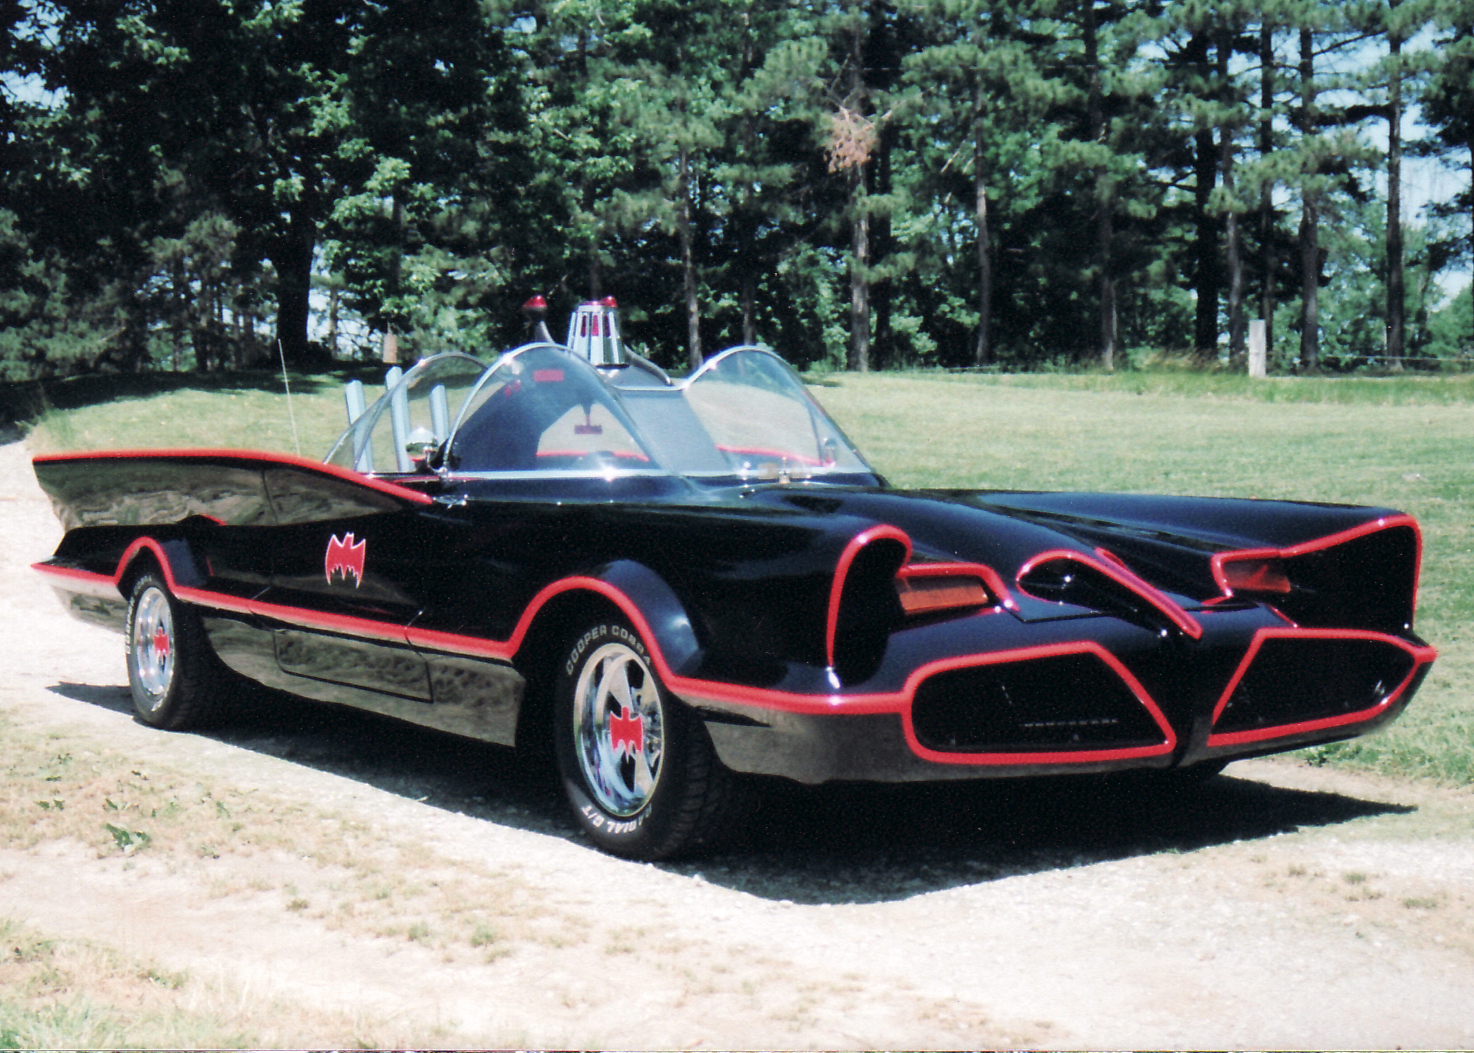 The Real Original Batmobile from 1963 Is For Sale - Thrillist